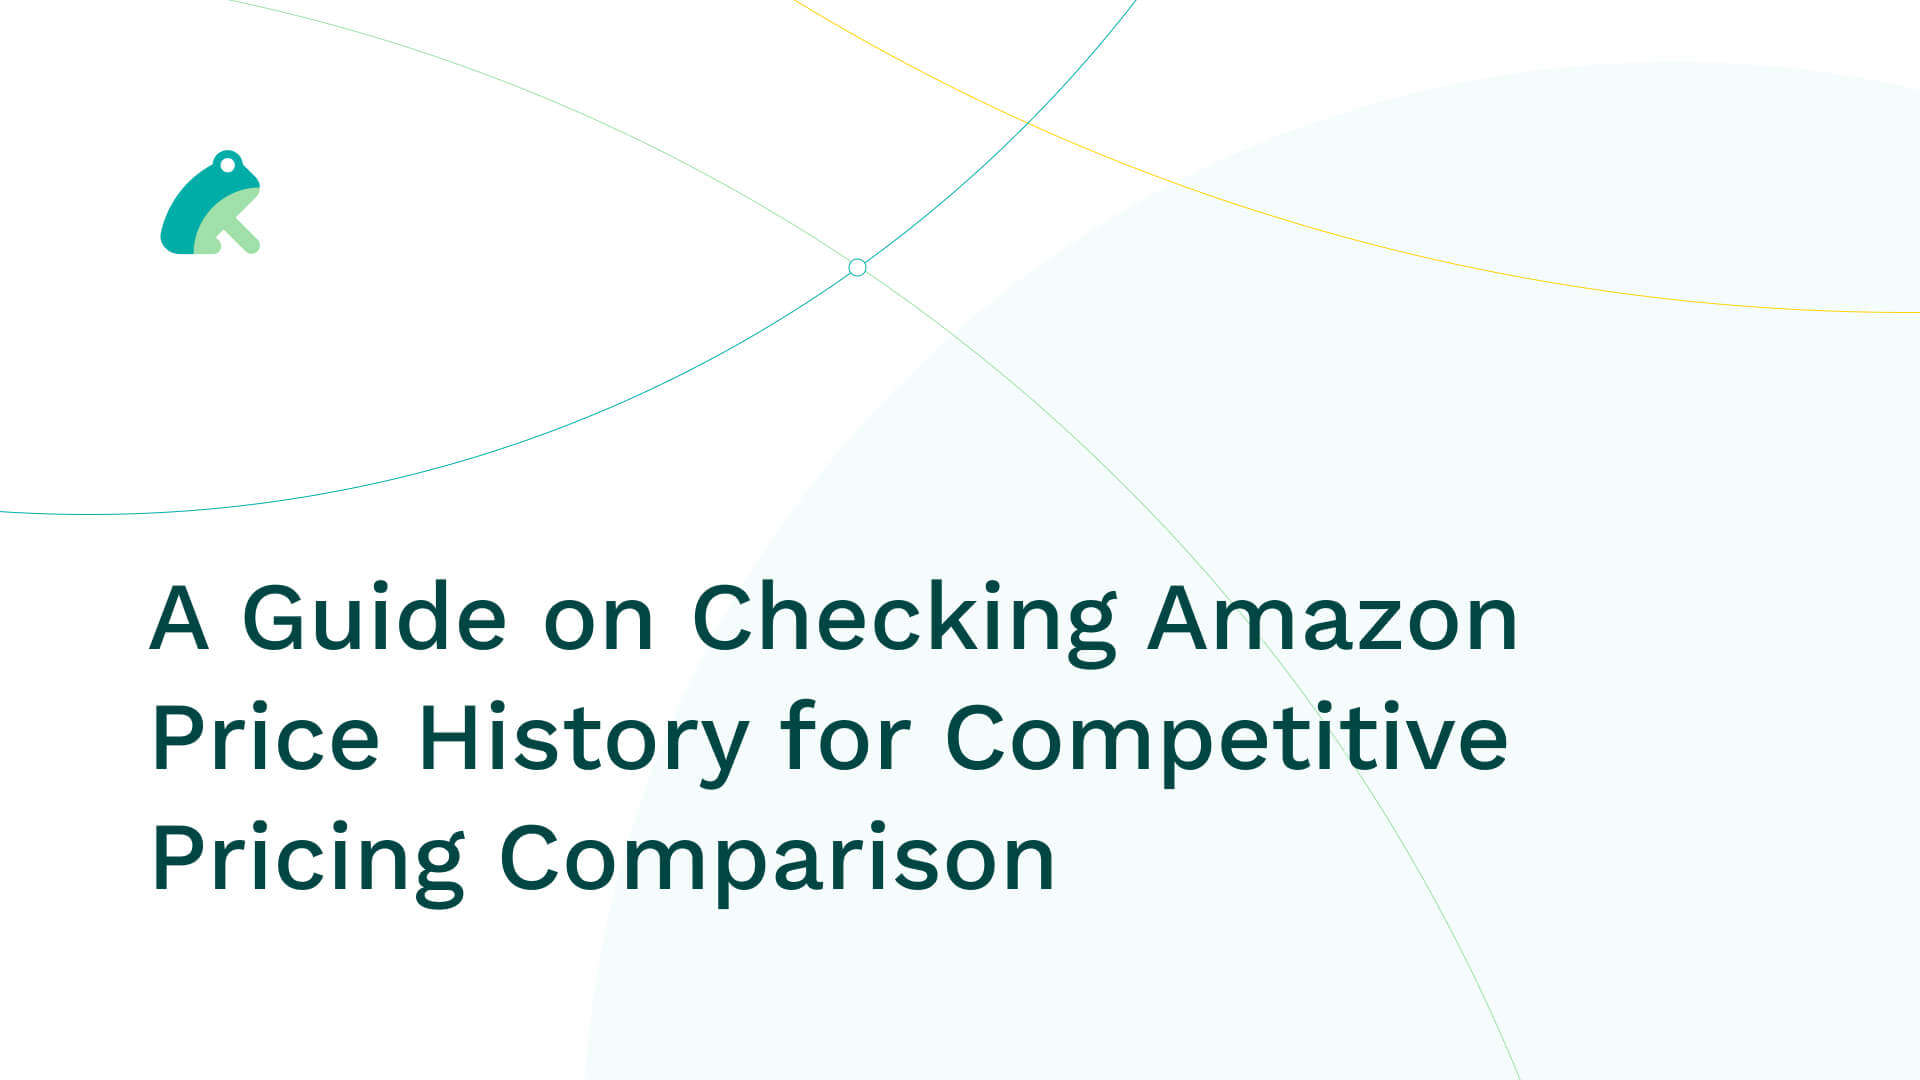 A Guide on Checking Amazon Price History for Competitive Pricing Comparison